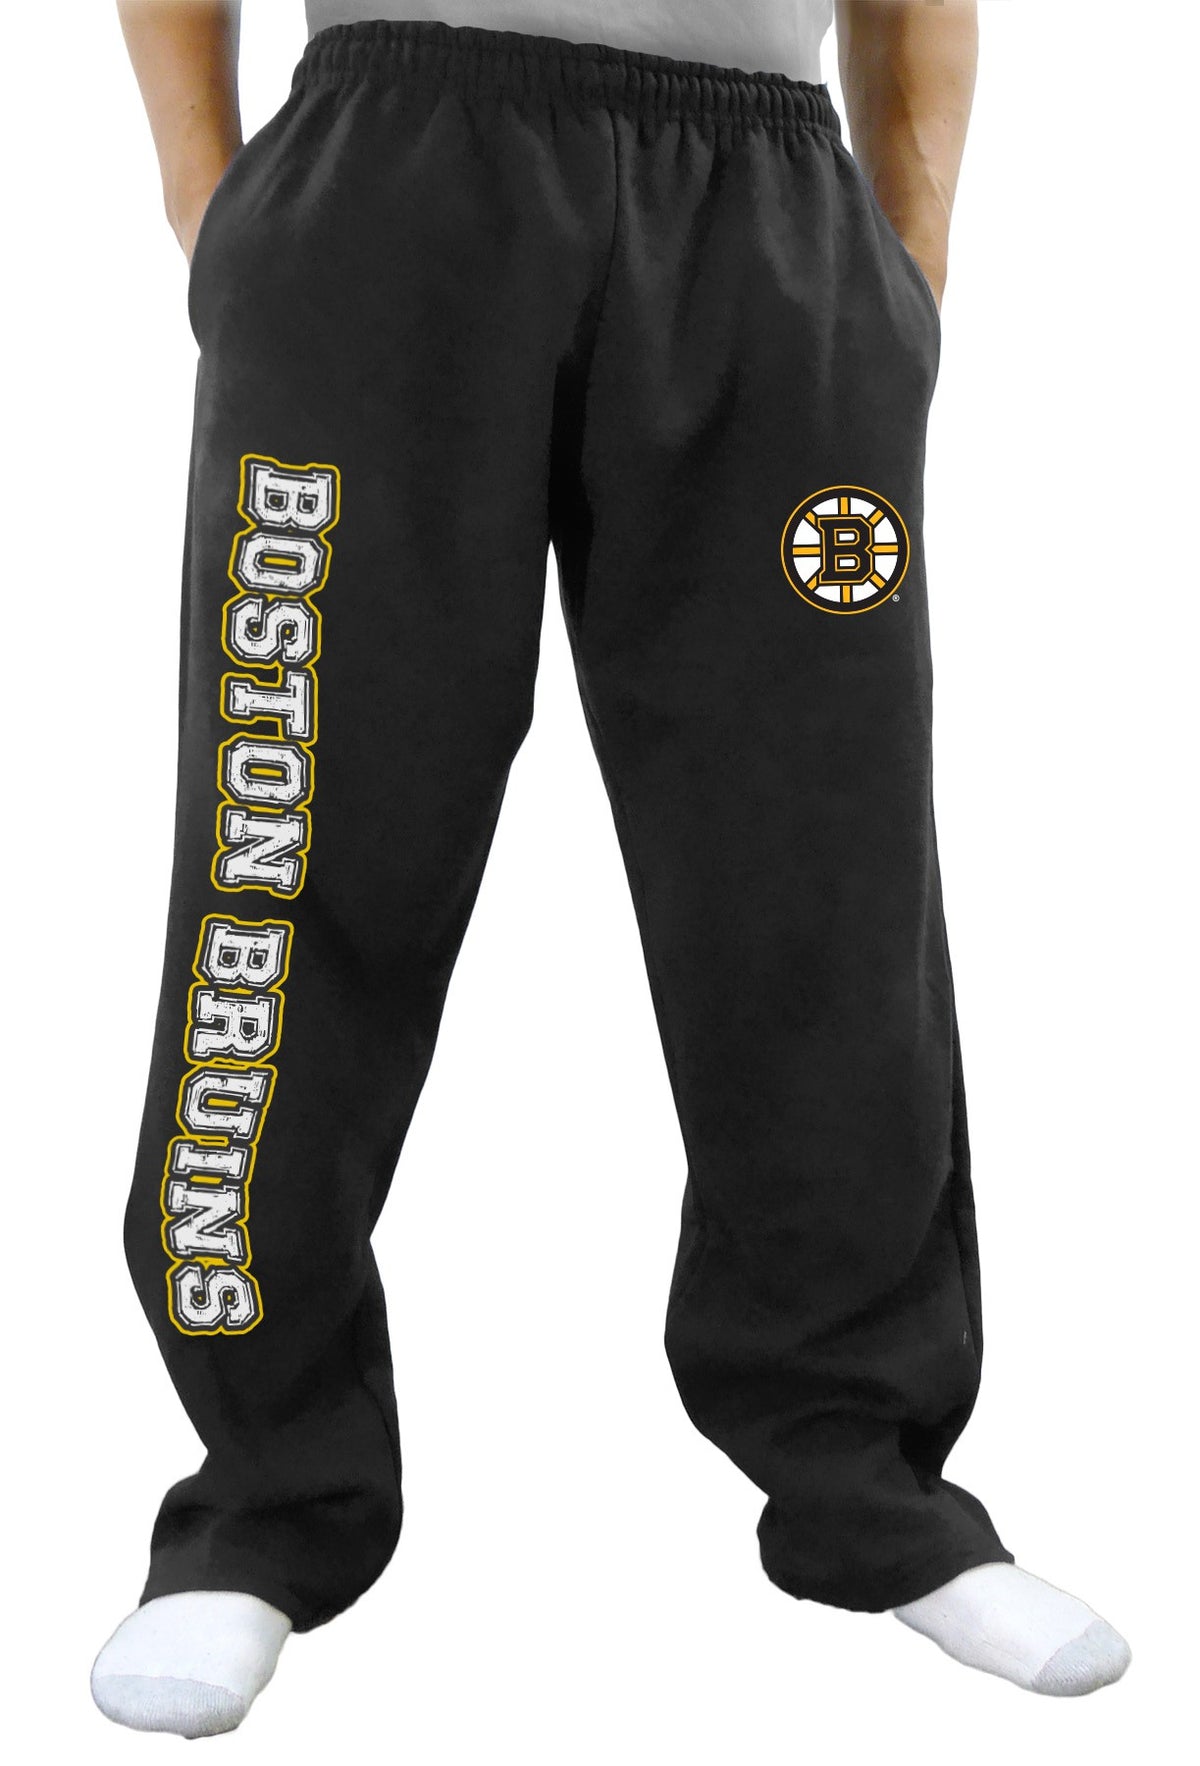 Boston Bruins Officially NHL Licensed Track Pants